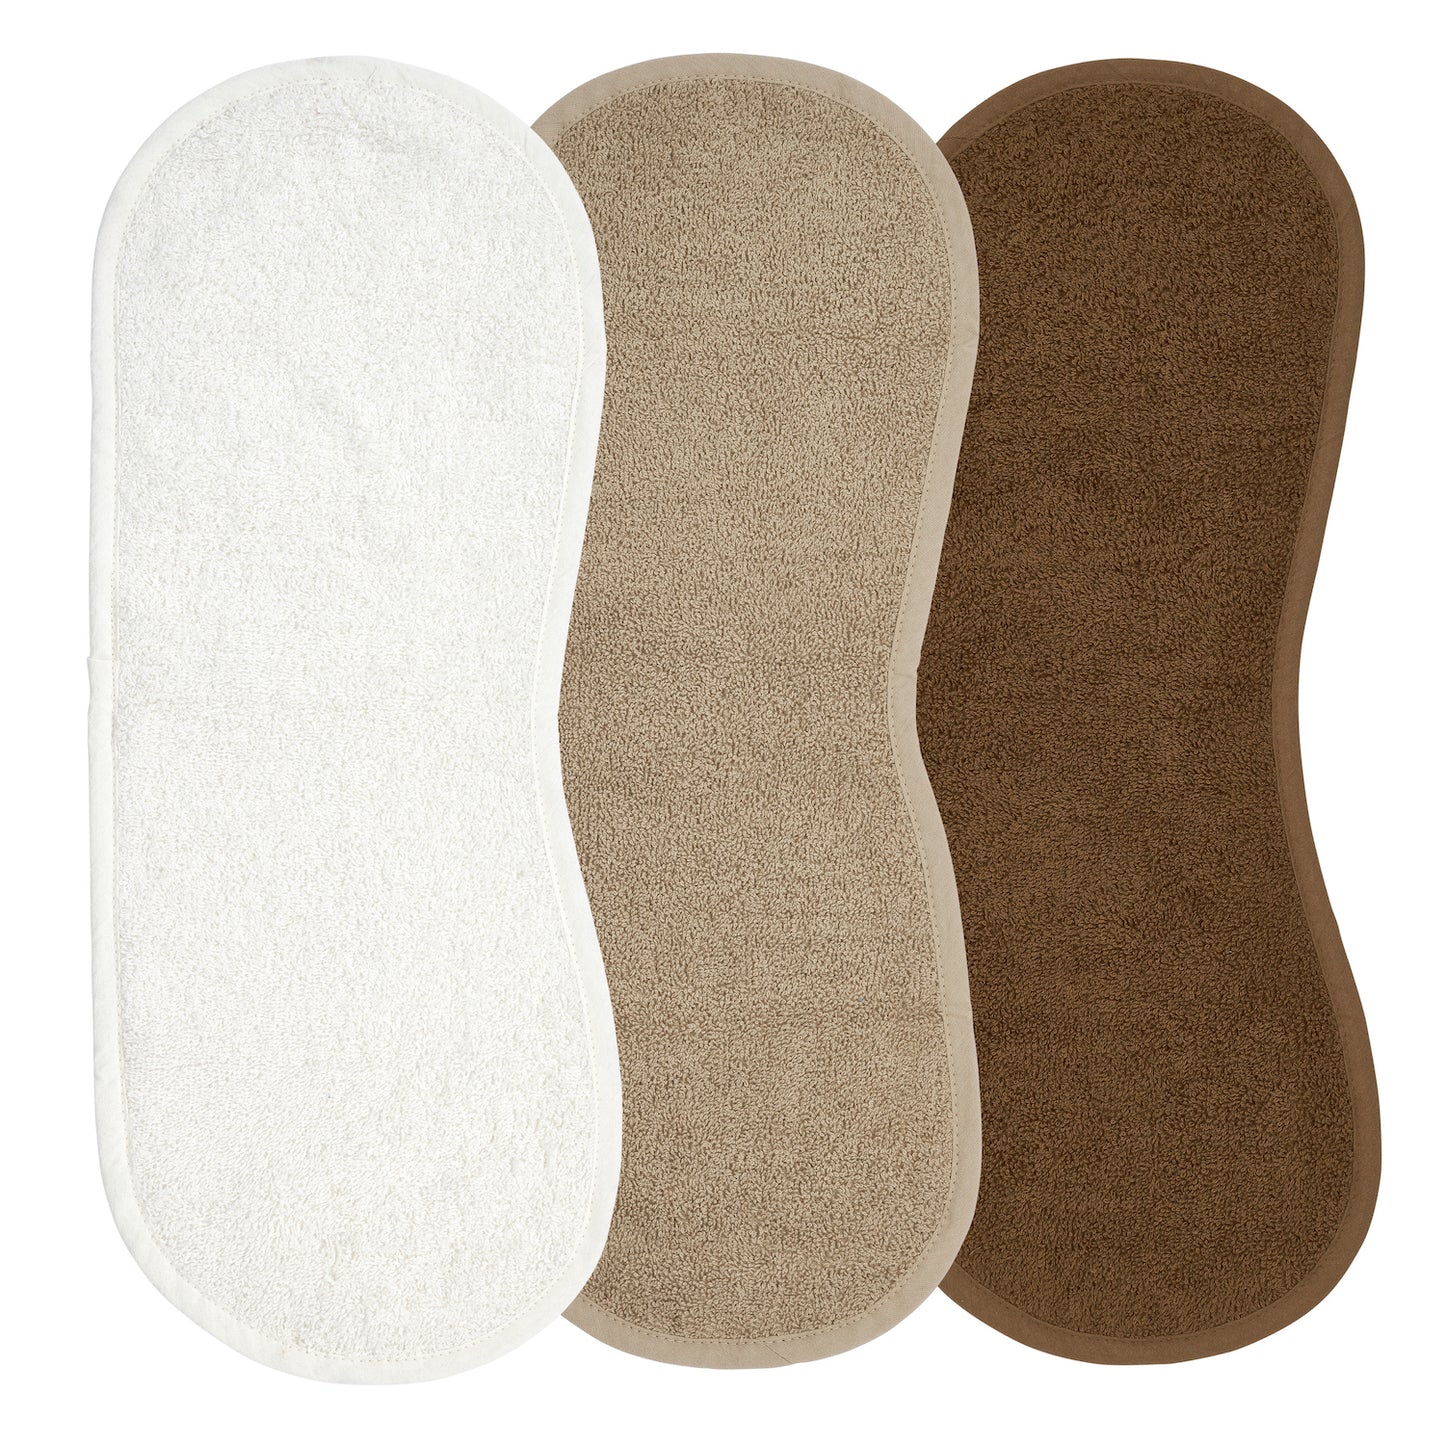 Basic Frottee Spucktücher Schultermodell 3er-Pack - Offwhite/Taupe/Chocolate